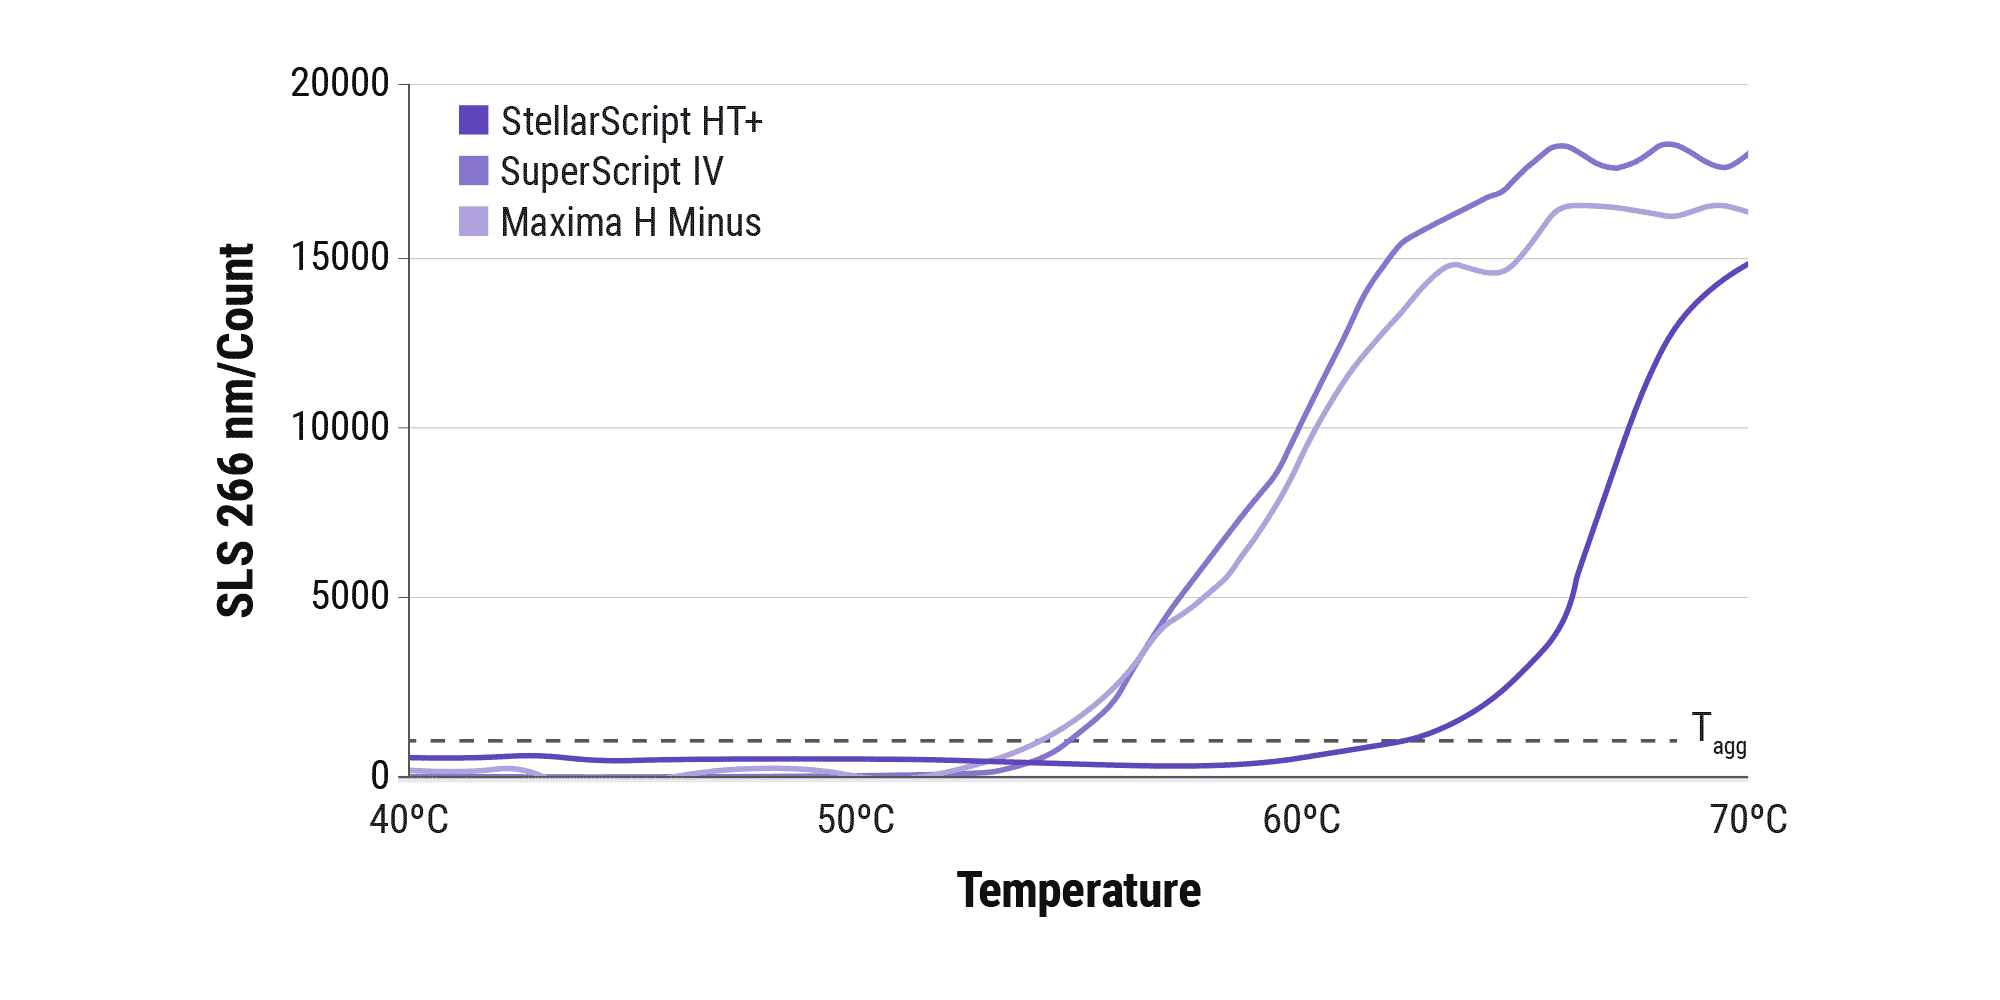 Figure 1B. Excellent performance at elevated temperatures. Enzymes were further assessed via static light scattering while increasing the temperature to determine their respective aggregation temperatures, the point at which protein unfolding begins. The enhanced thermostability of StellarScript HT+ is further demonstrated with its increased aggregation temperature.